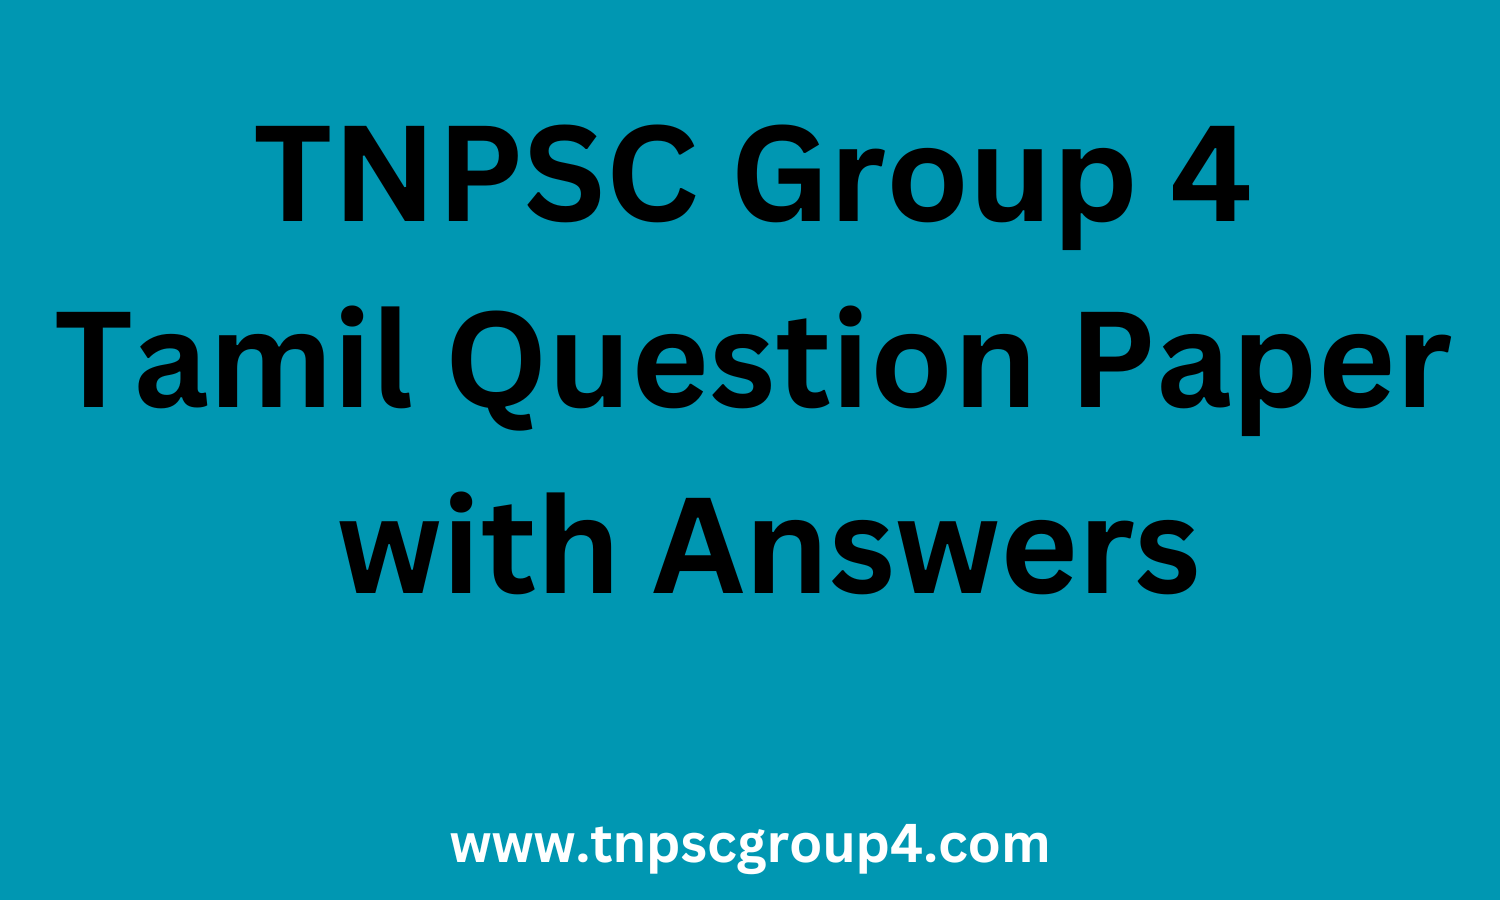 Tnpsc Group 4 Tamil Question Paper With Answers 0996